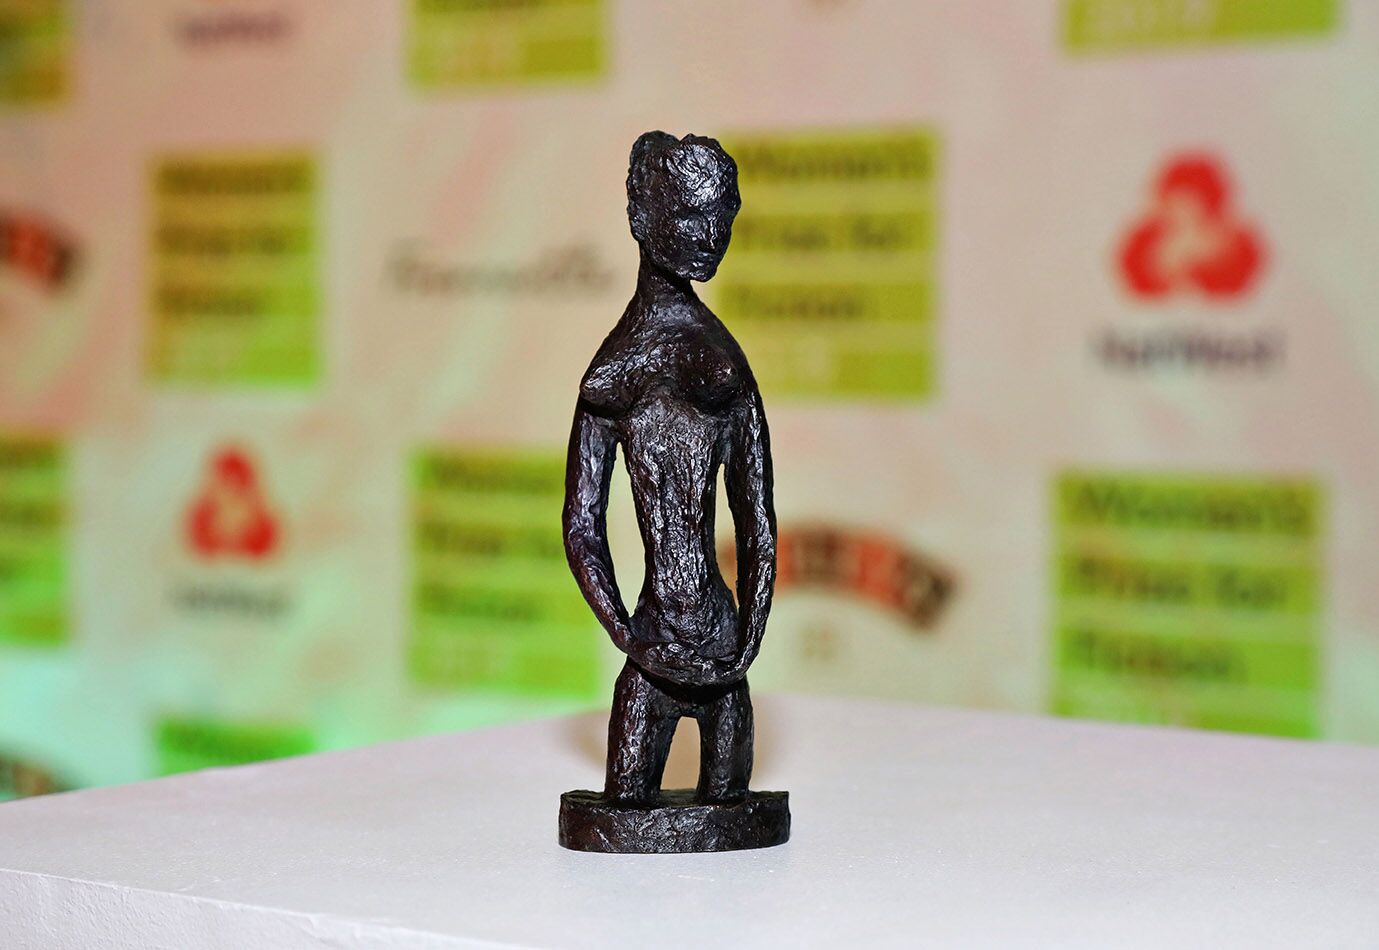 Bessie Award statuette by Grizel Niven (for the fiction award)